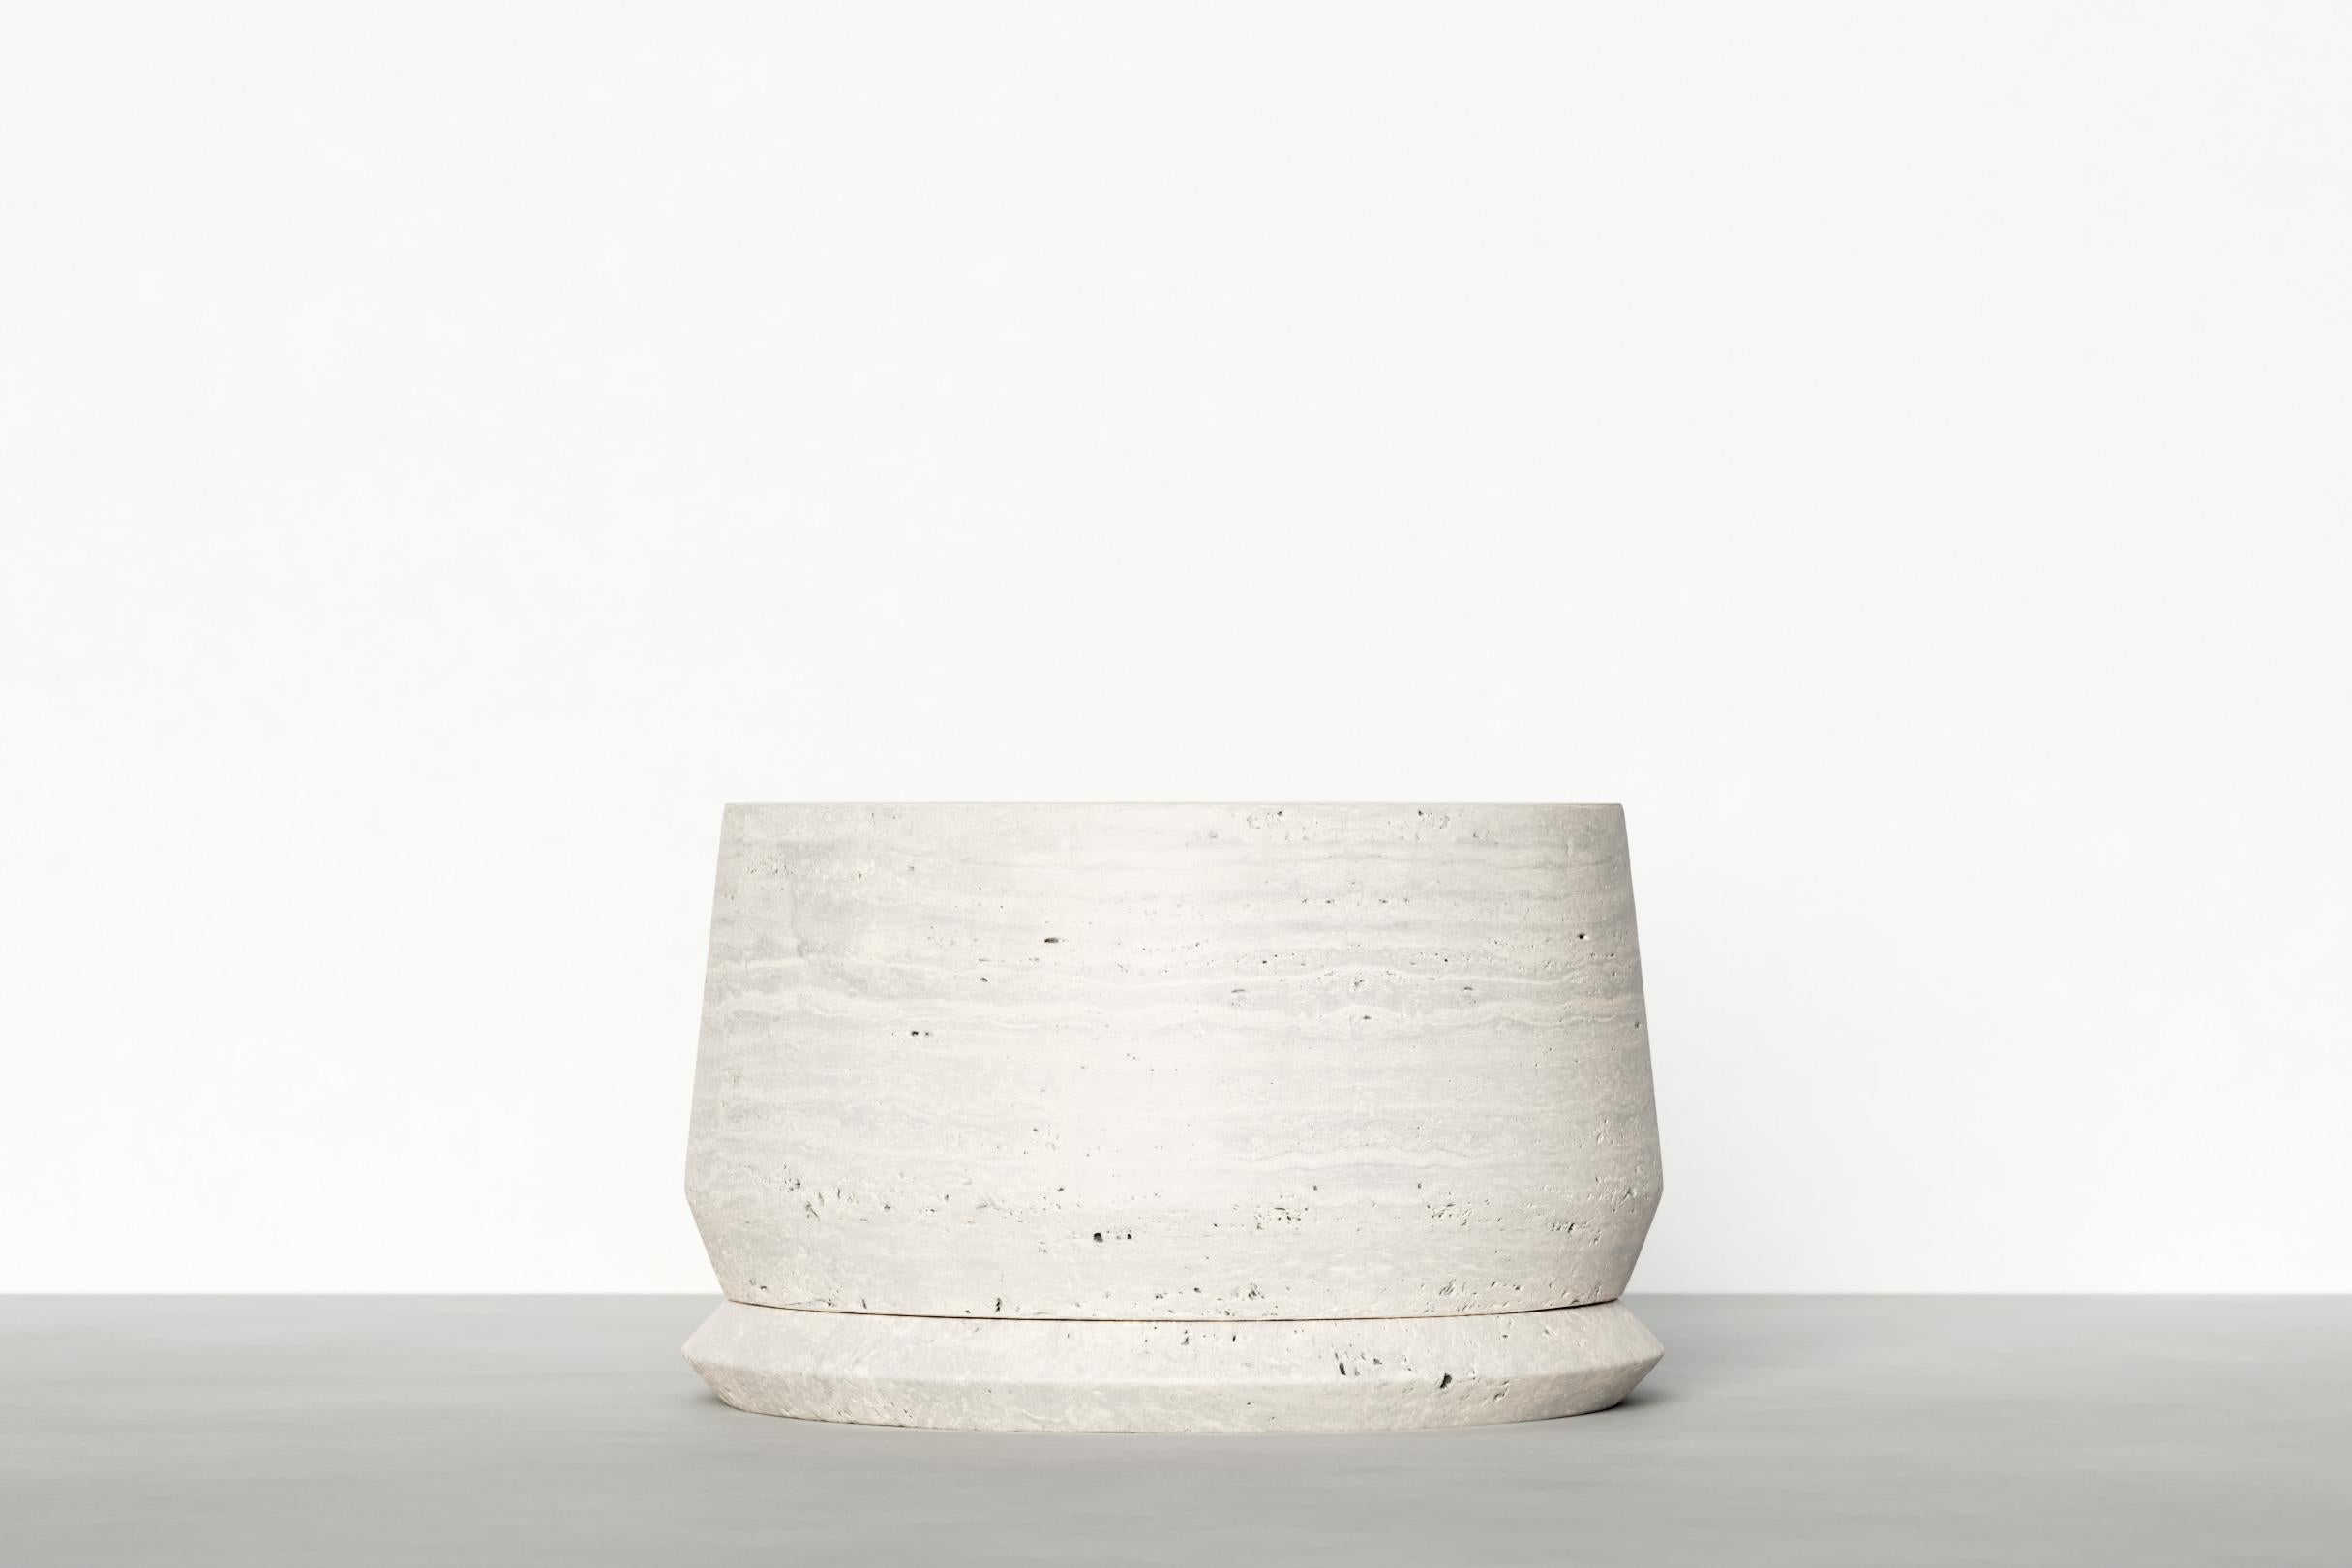 Timeless side table III by Maria Osminina
Limited Edition of 12
Dimensions: 50 x 50 x 30 cm
Materials: Travertino Romano

Timeless is a series of pieces of stone furniture in which the aesthetic vector is aimed at a deep sense of time as being. It